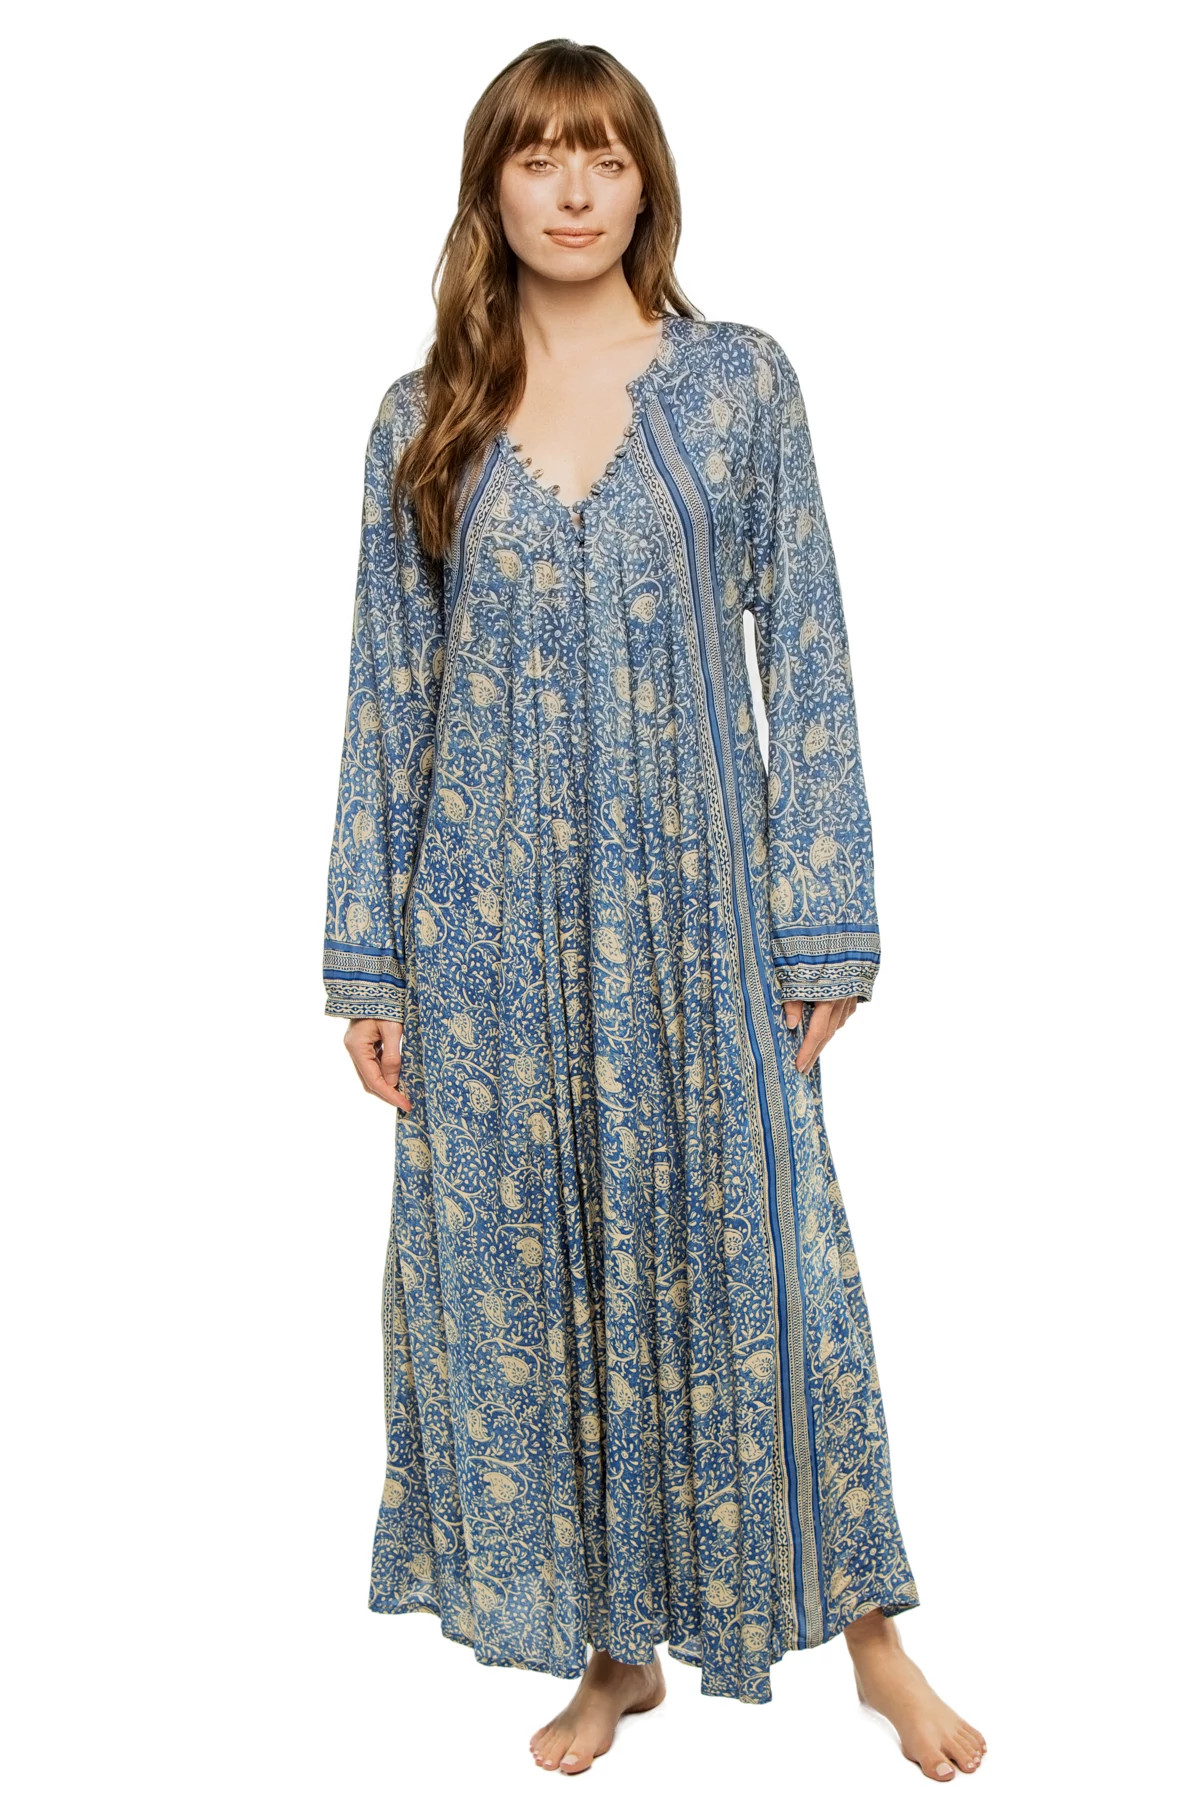 WATER LILY BLUE Fiore Maxi Dress image number 1